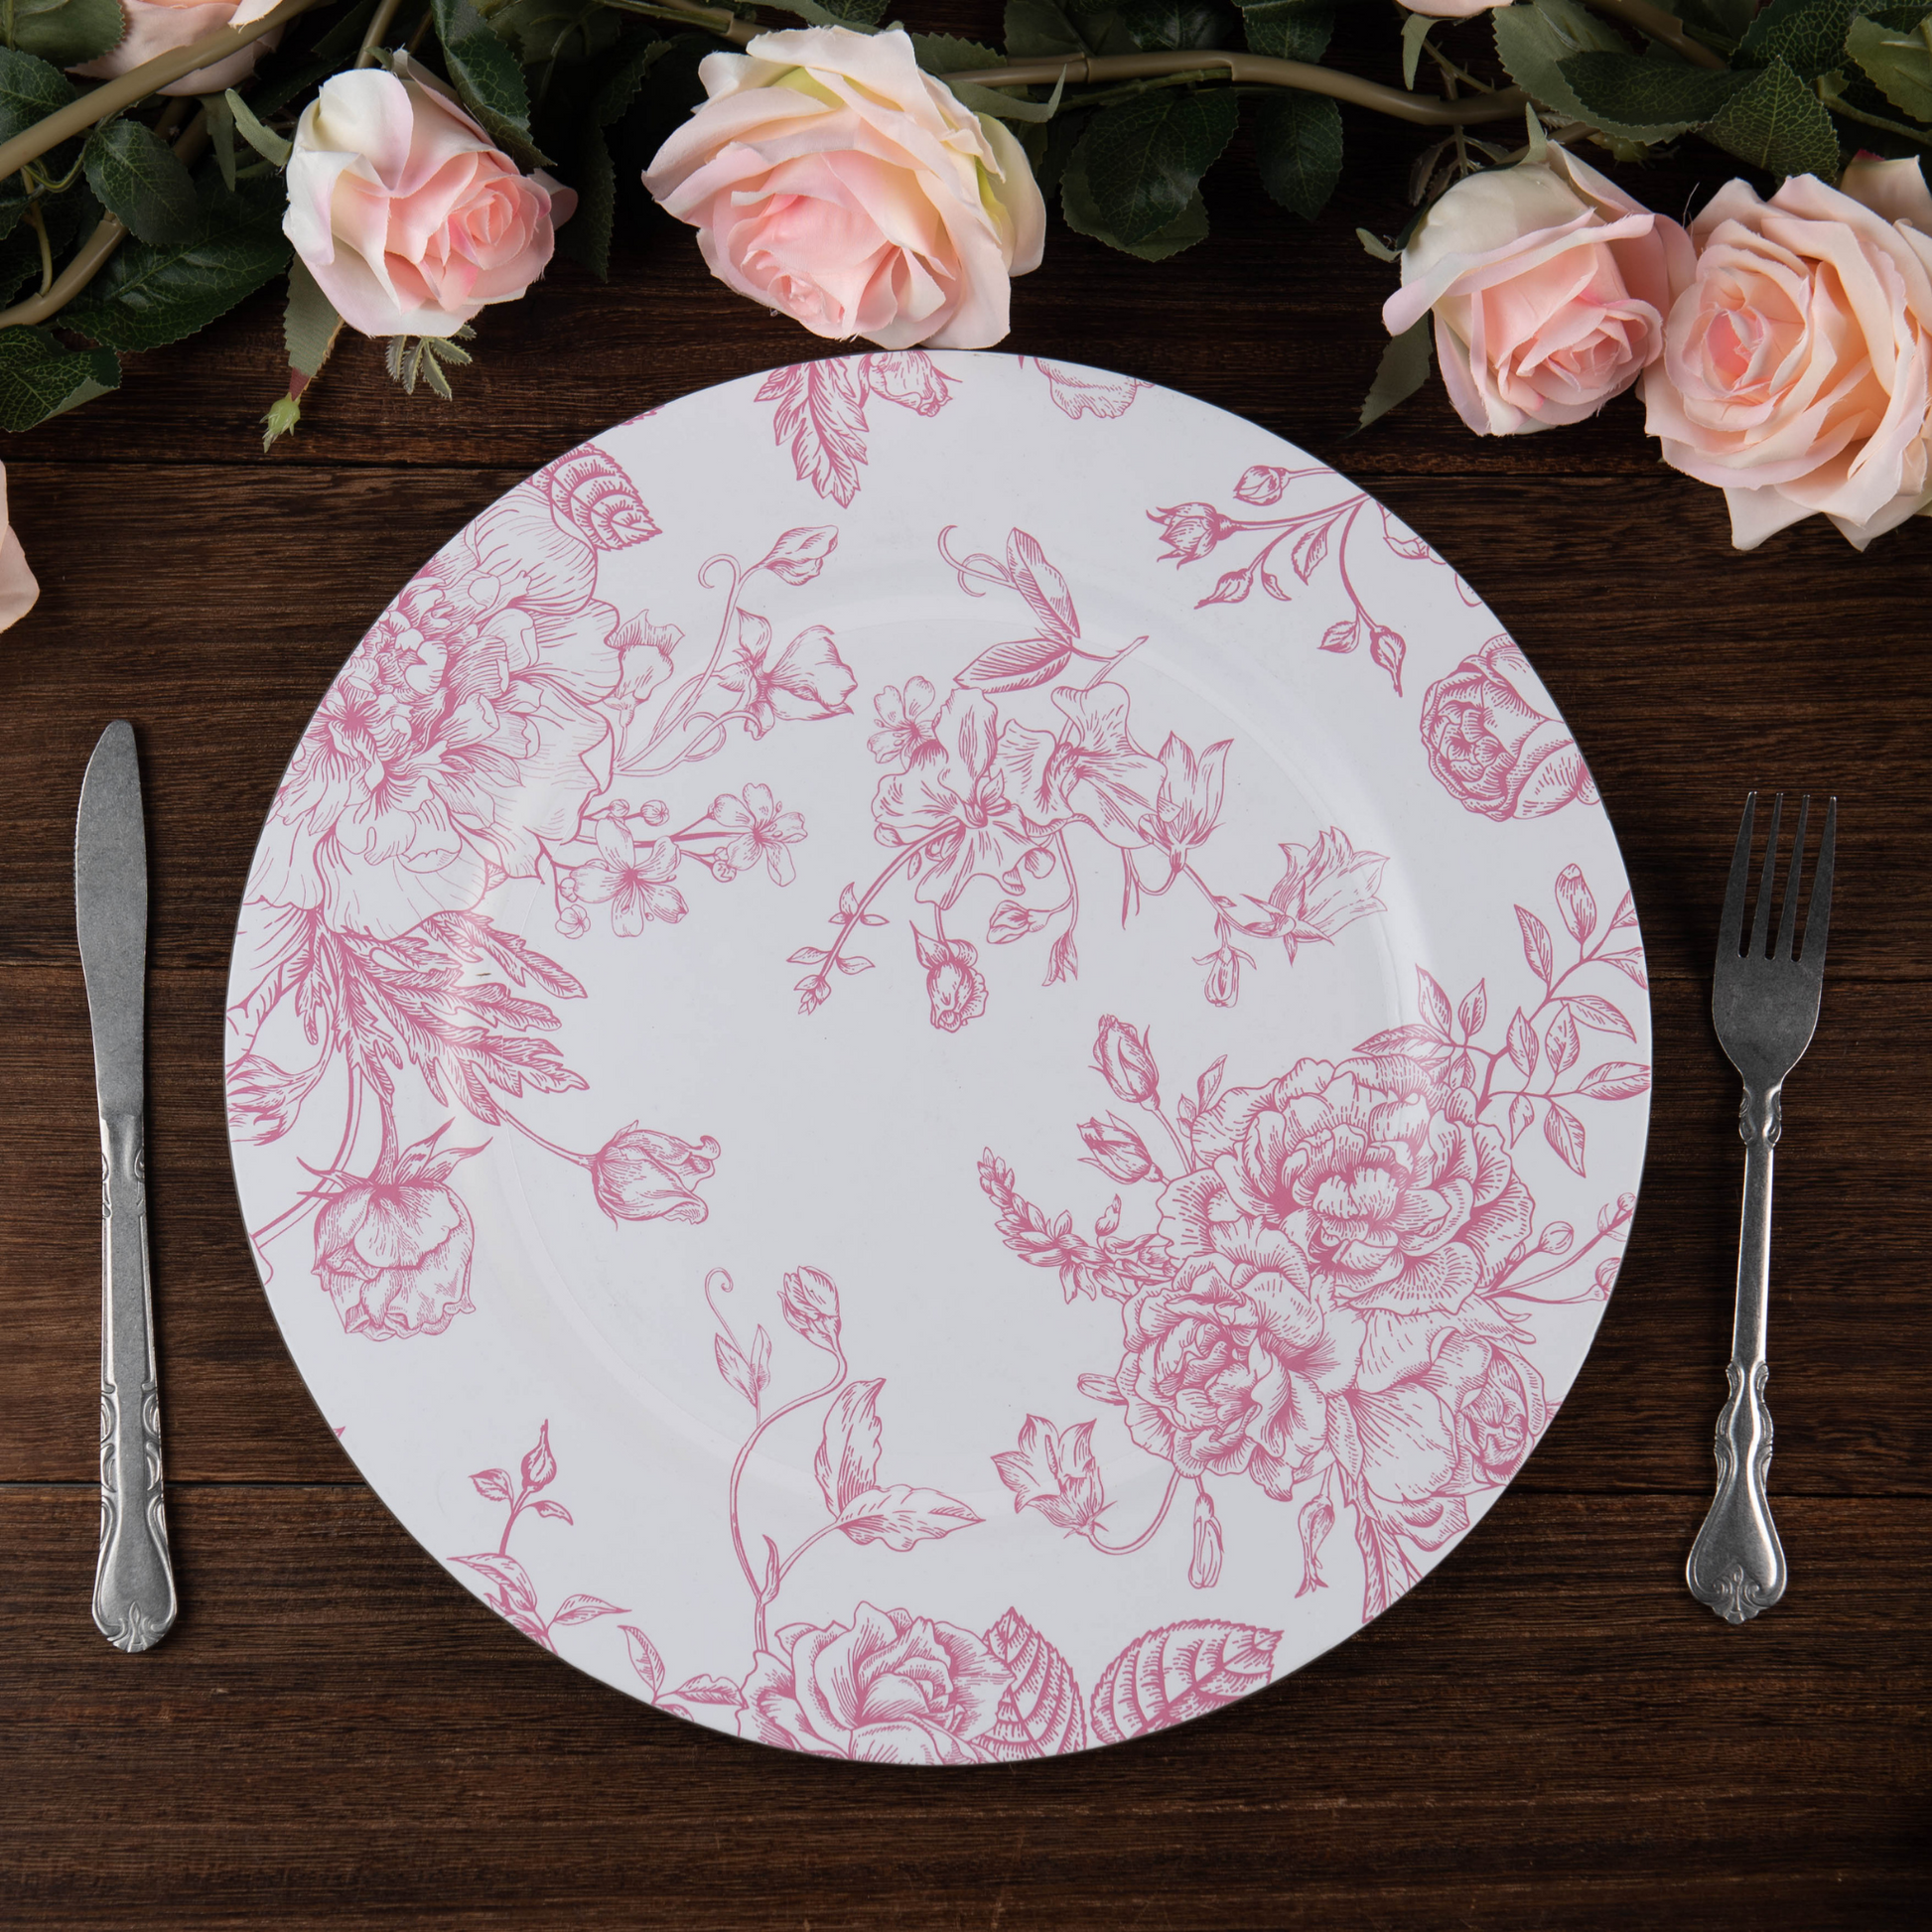 French Toile Acrylic Charger Plate - Pink